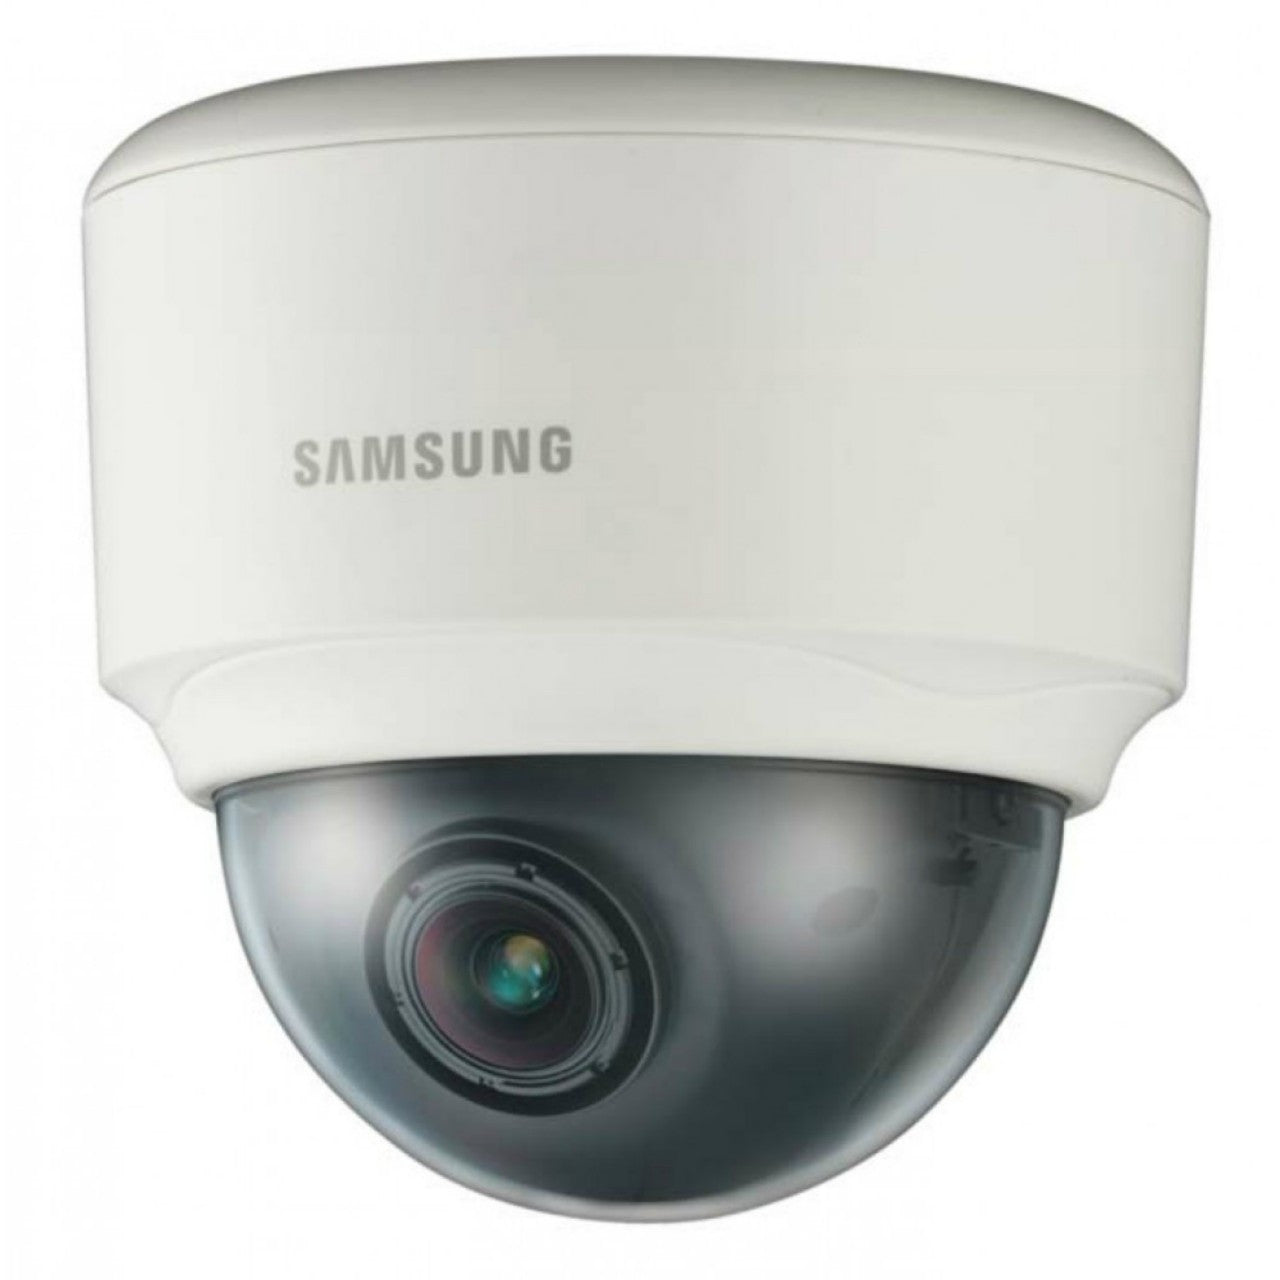 Samsung SND-3080C 4CIF People Counting Network Dome Camera